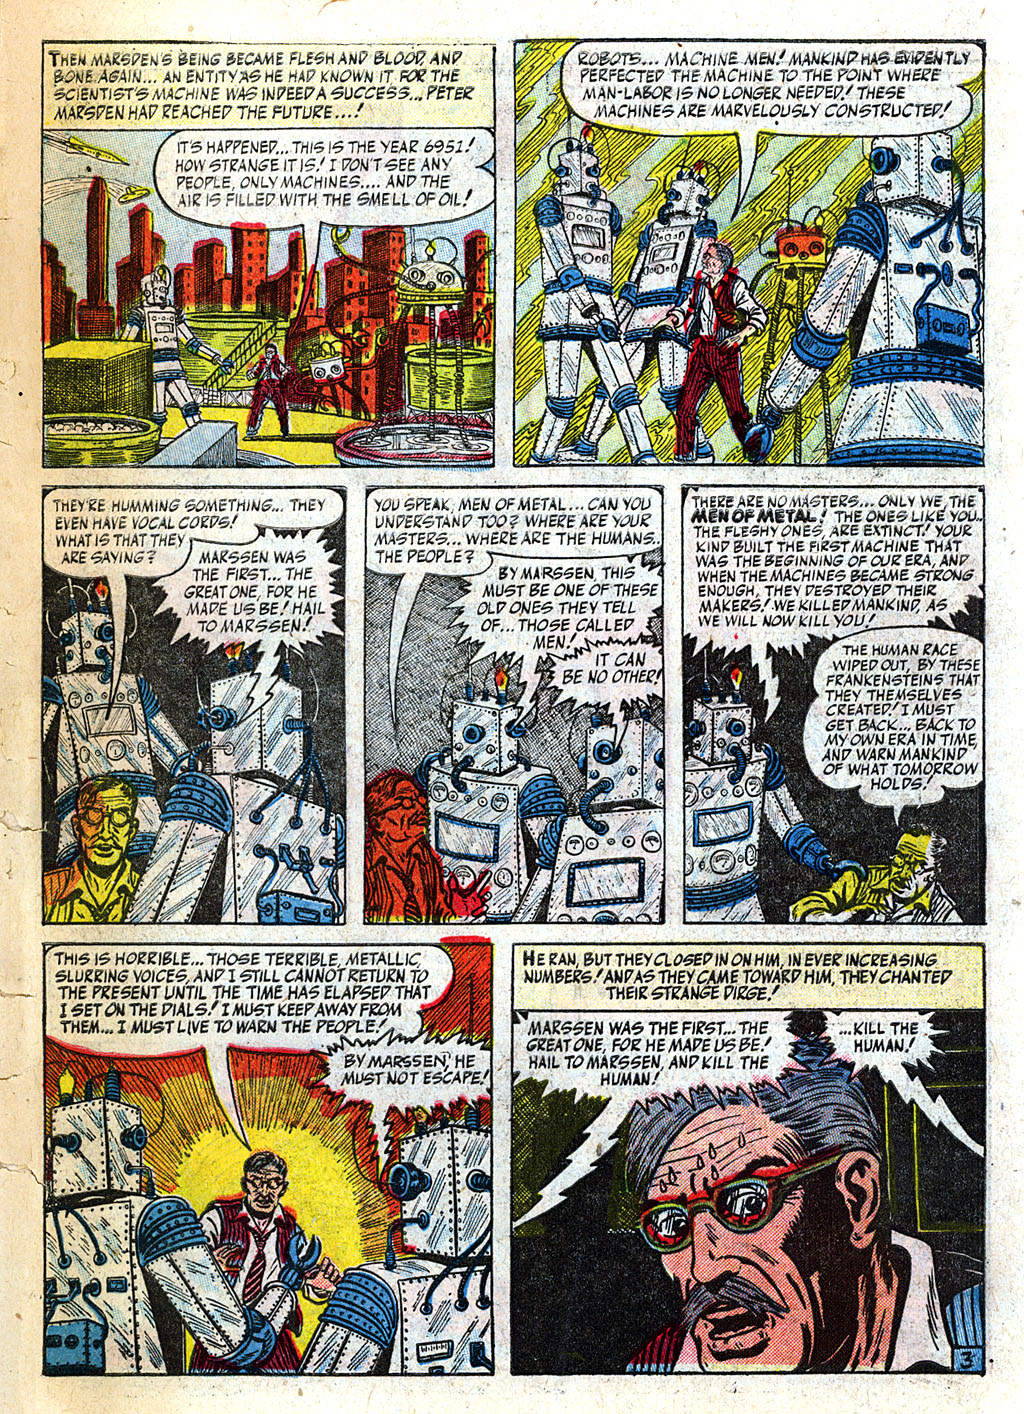 Marvel Tales (1949) 104 Page 30